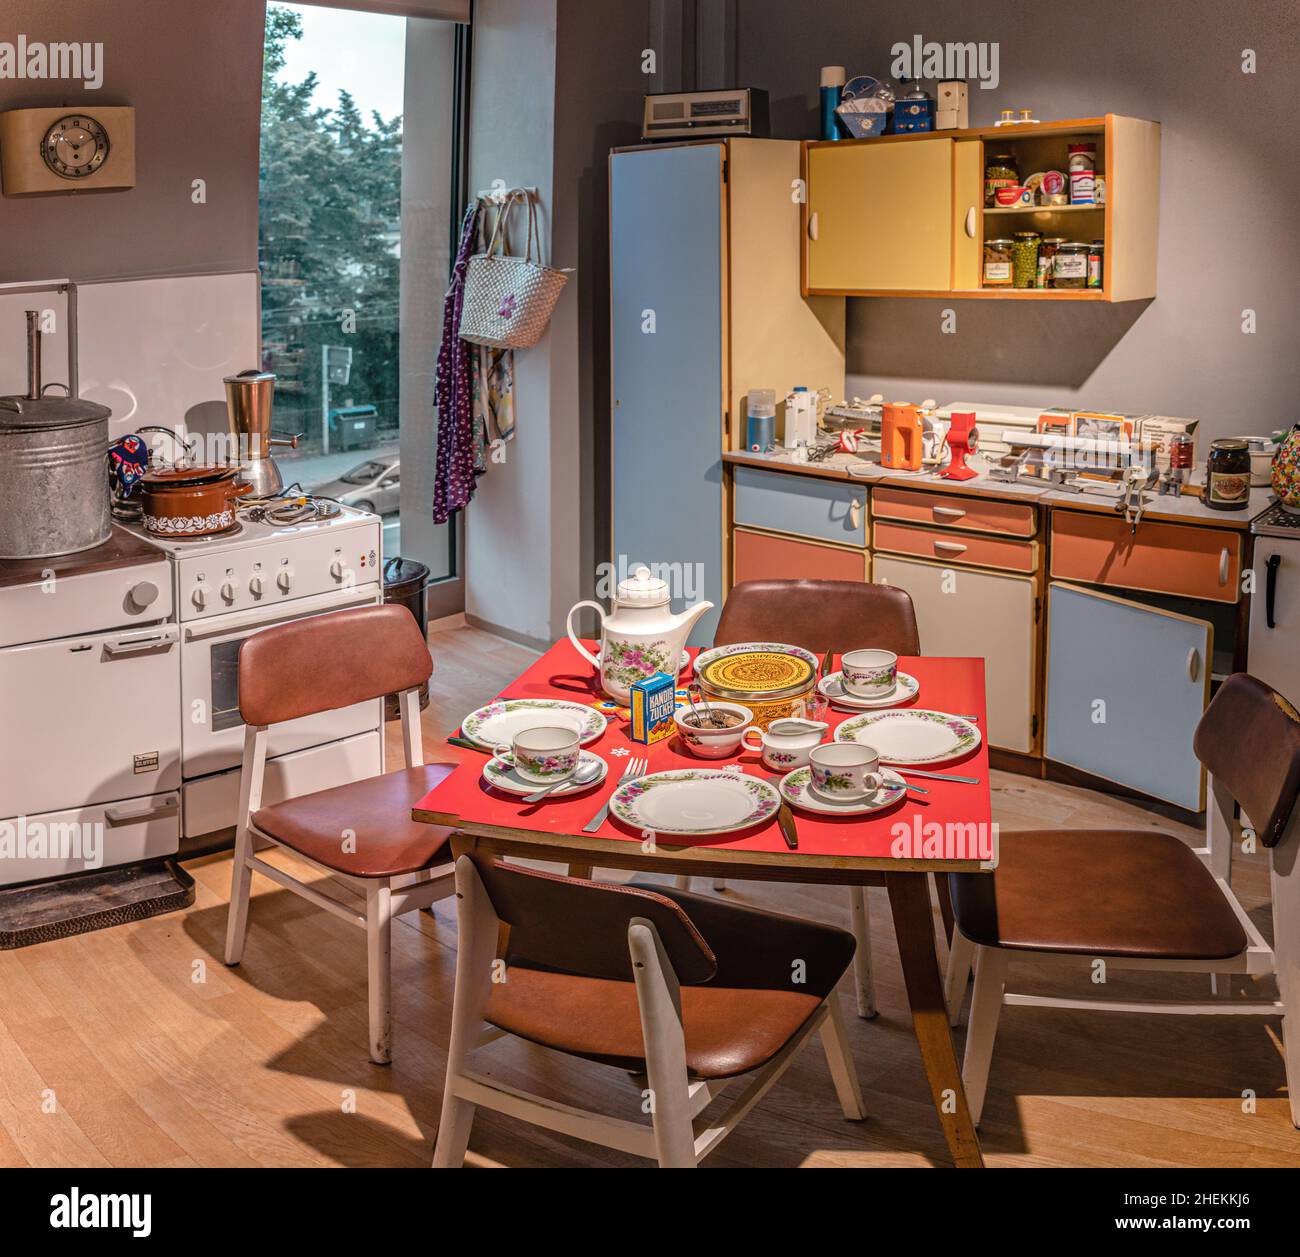 Typical DDR kitchen furnishing in the DDR Museum in Dresden, Saxony, Germany Stock Photo